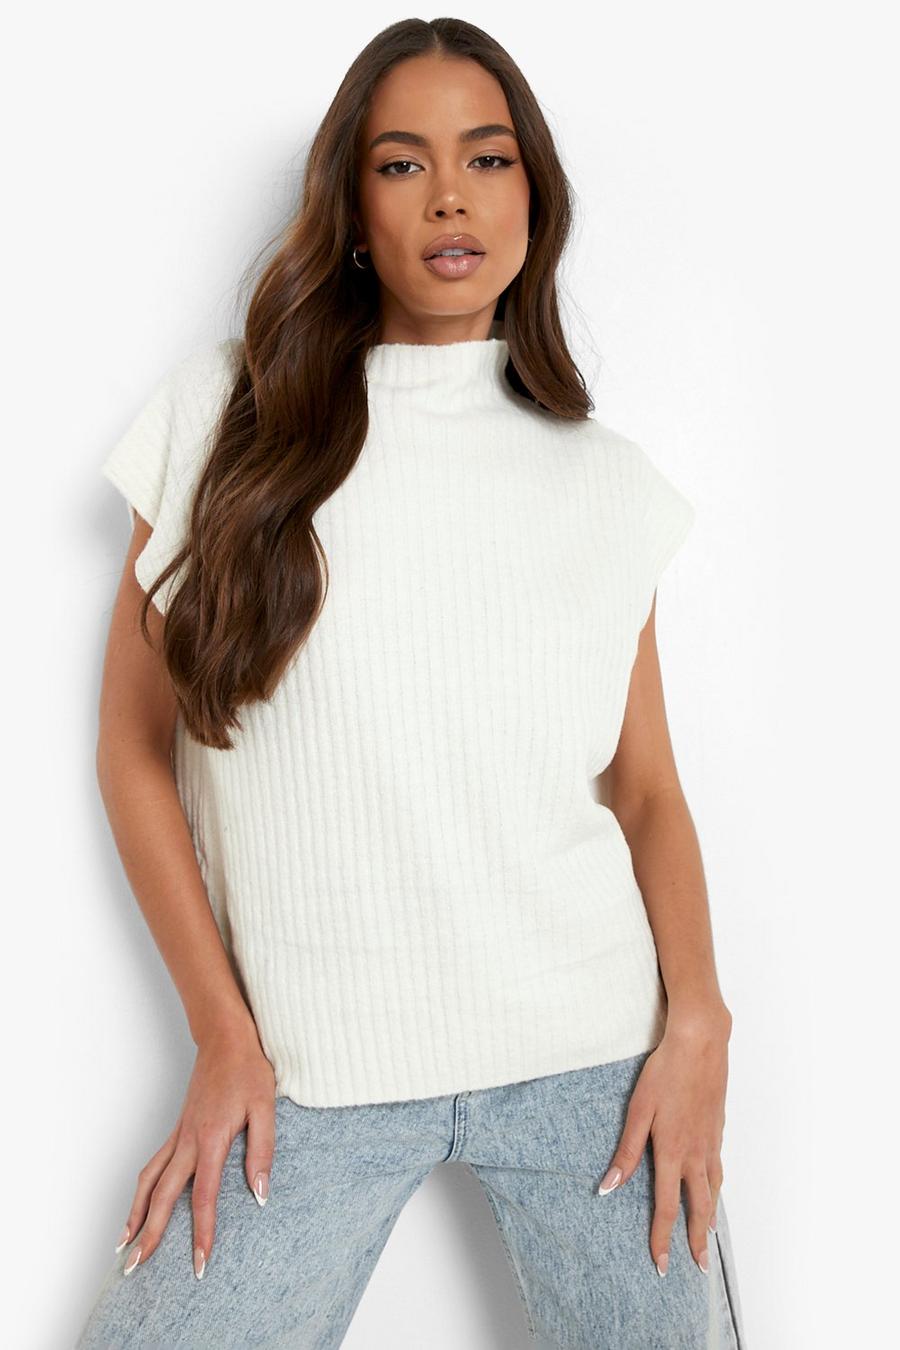 Top sans manches en maille, Cream white image number 1